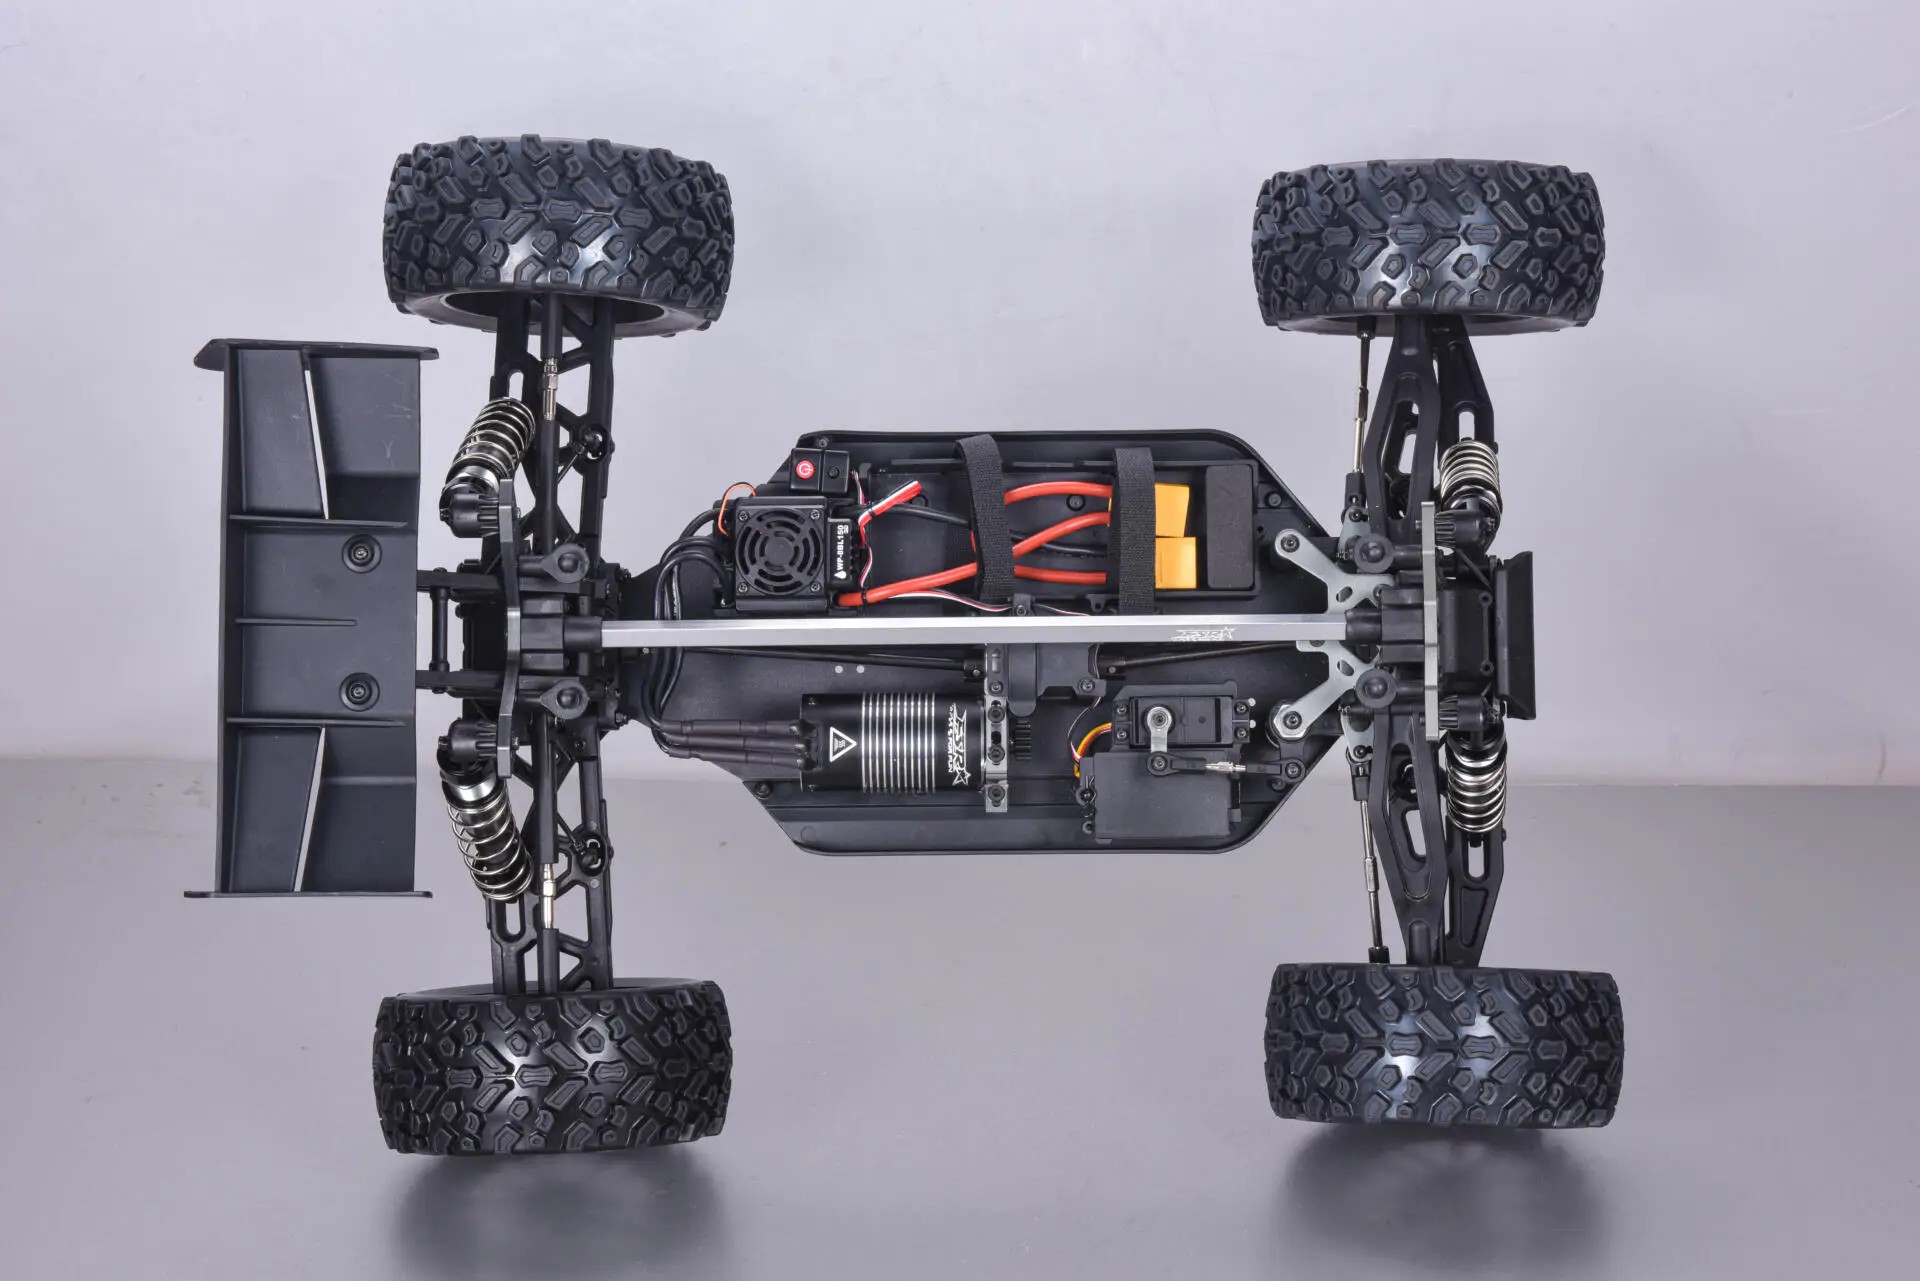 FS Racing Leopard 6s 4WD 1/8 Truggy